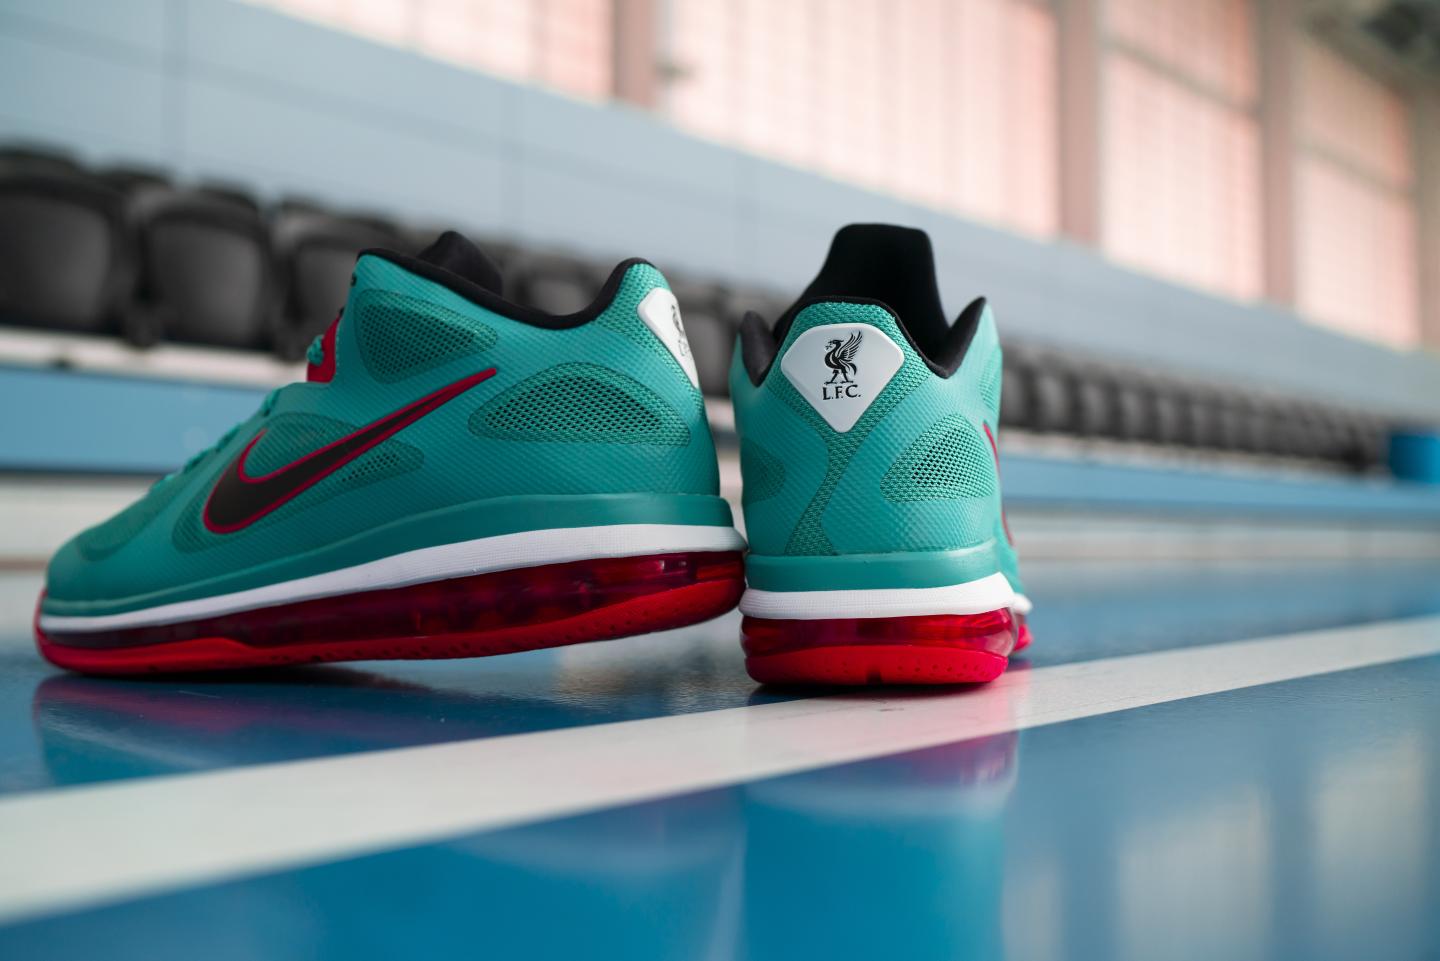 Obligate tongue behind Liverpool FC — Shop the new Liverpool FC Nike LeBron 9 Low